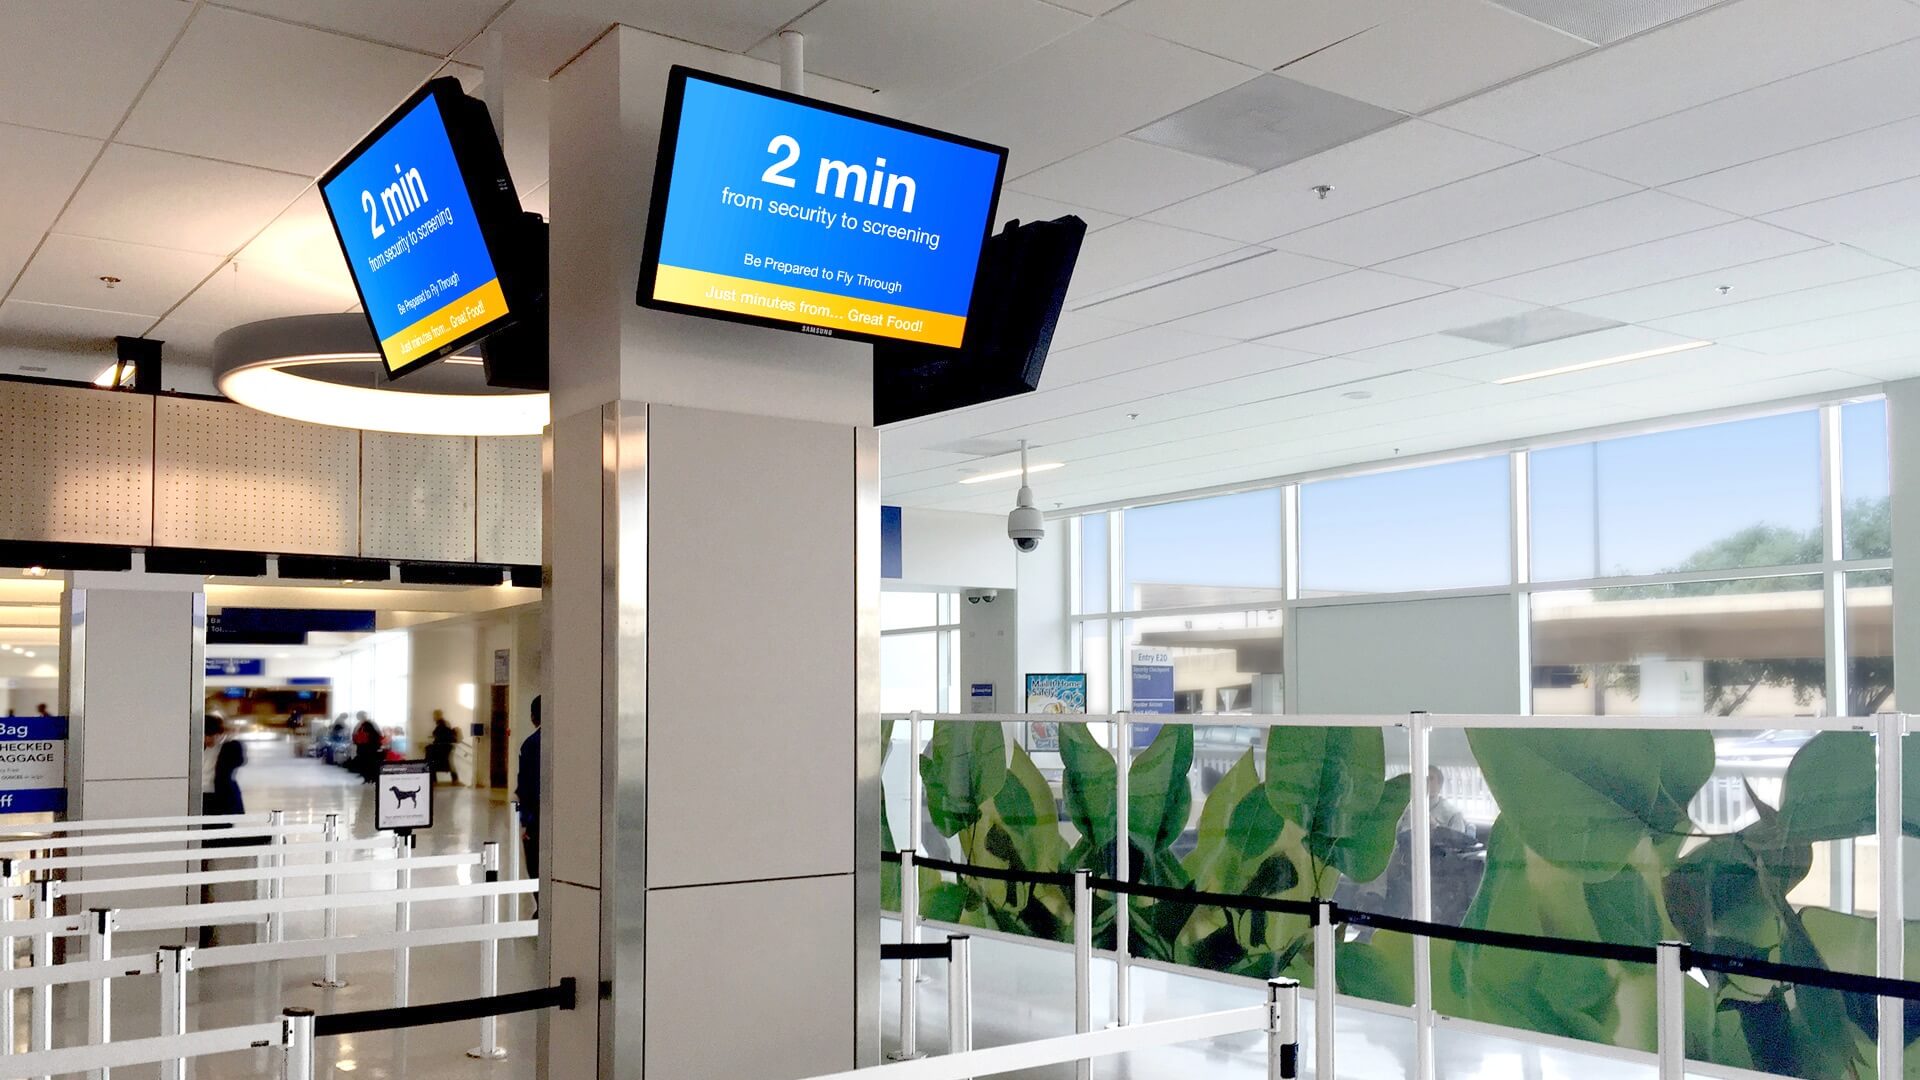 Airport,Queuing,Stanchions,RigidRail,MagneticBase,QtraciQ,Barriers,HingedFramePanels,Signage,Technology